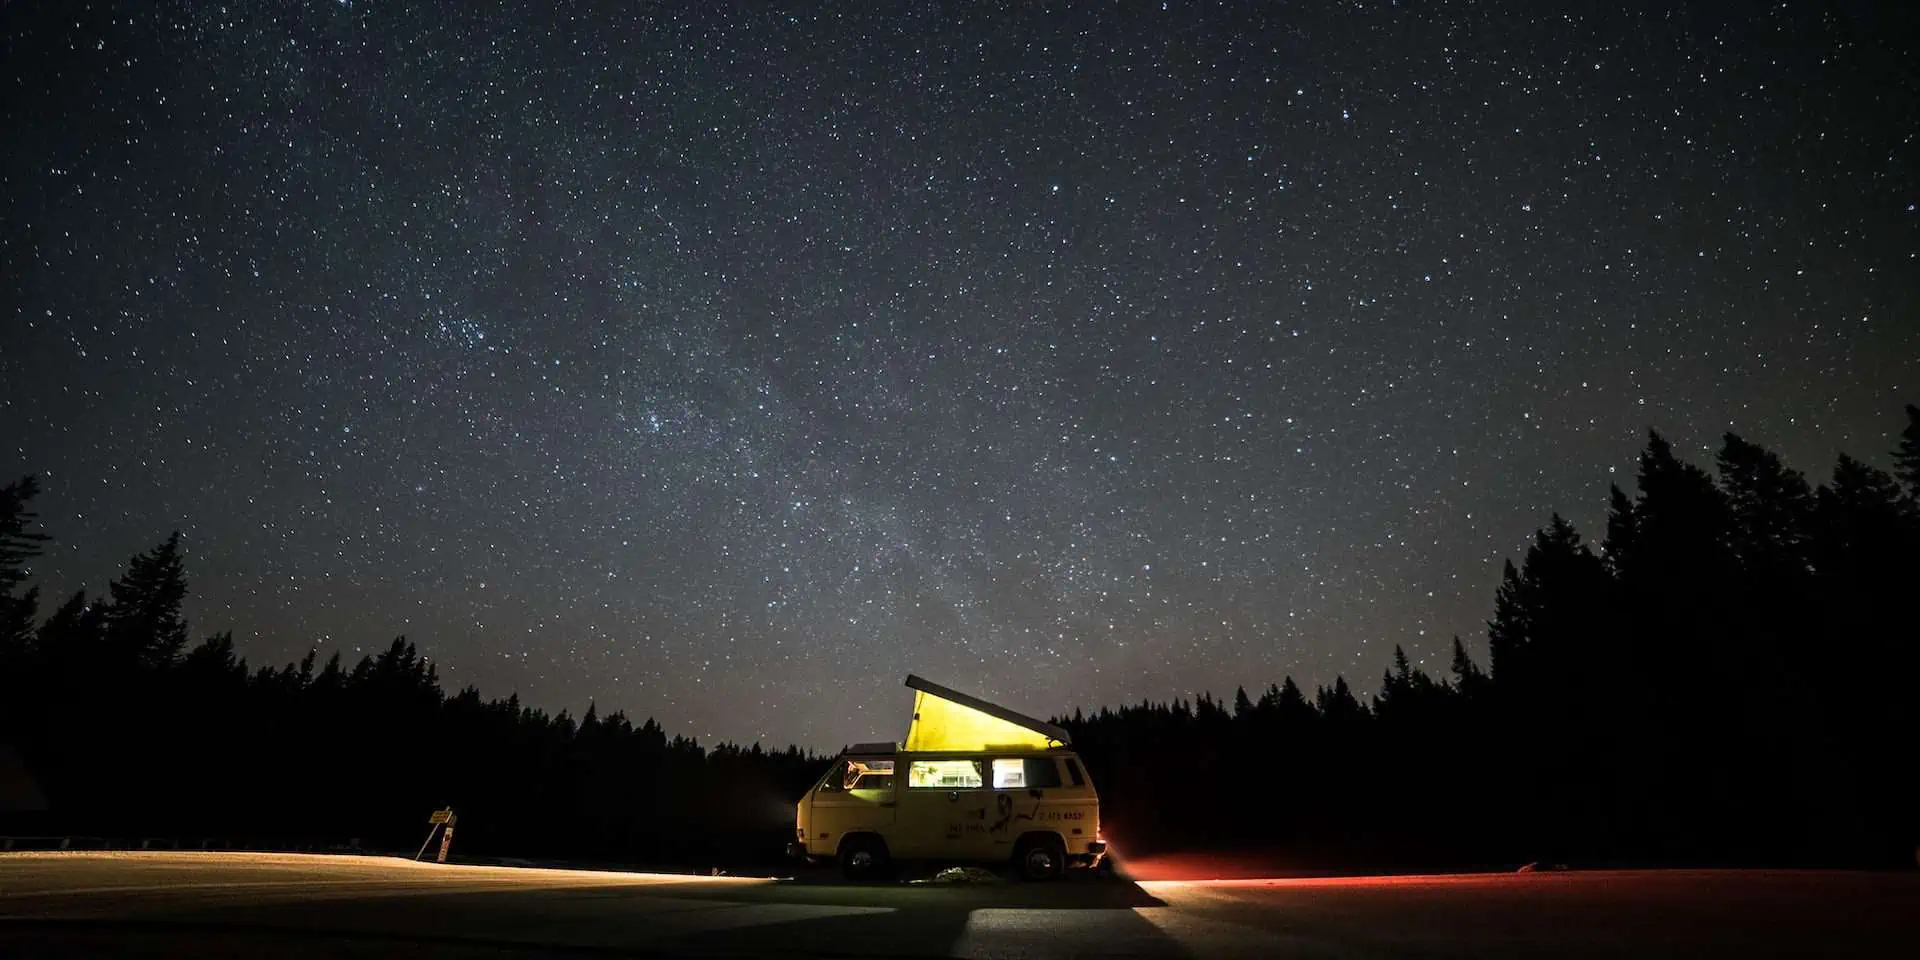 Road trip van parked at night with starry sky and trees